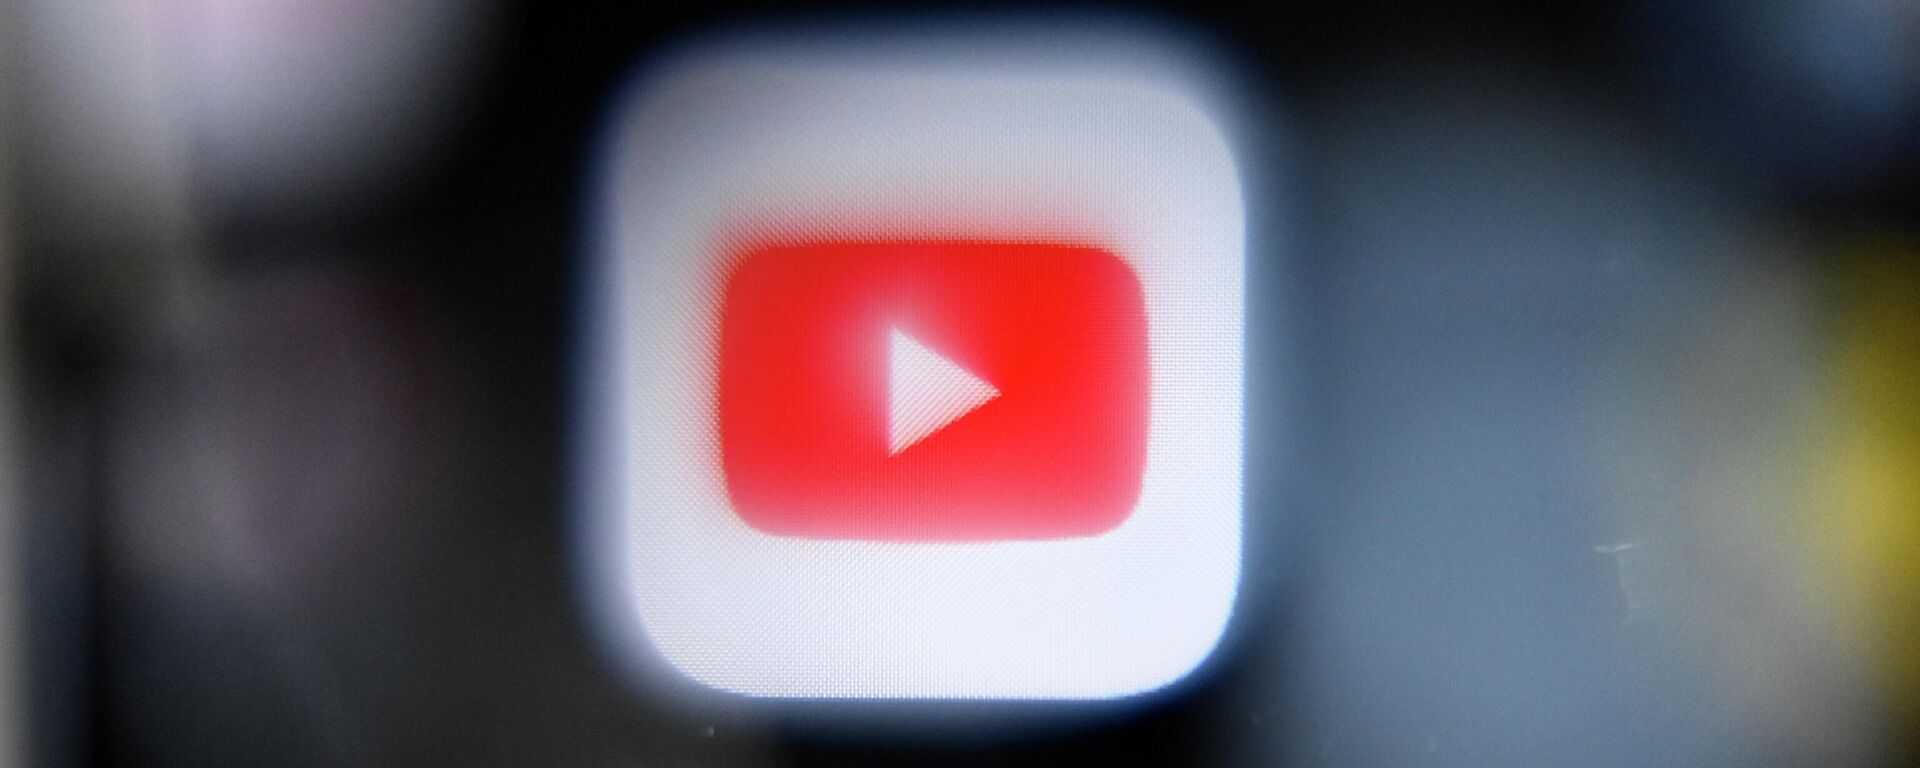 This picture taken in Moscow on October 12, 2021 shows the logo of Youtube social media on a smartphone screen.  - Sputnik International, 1920, 29.03.2022